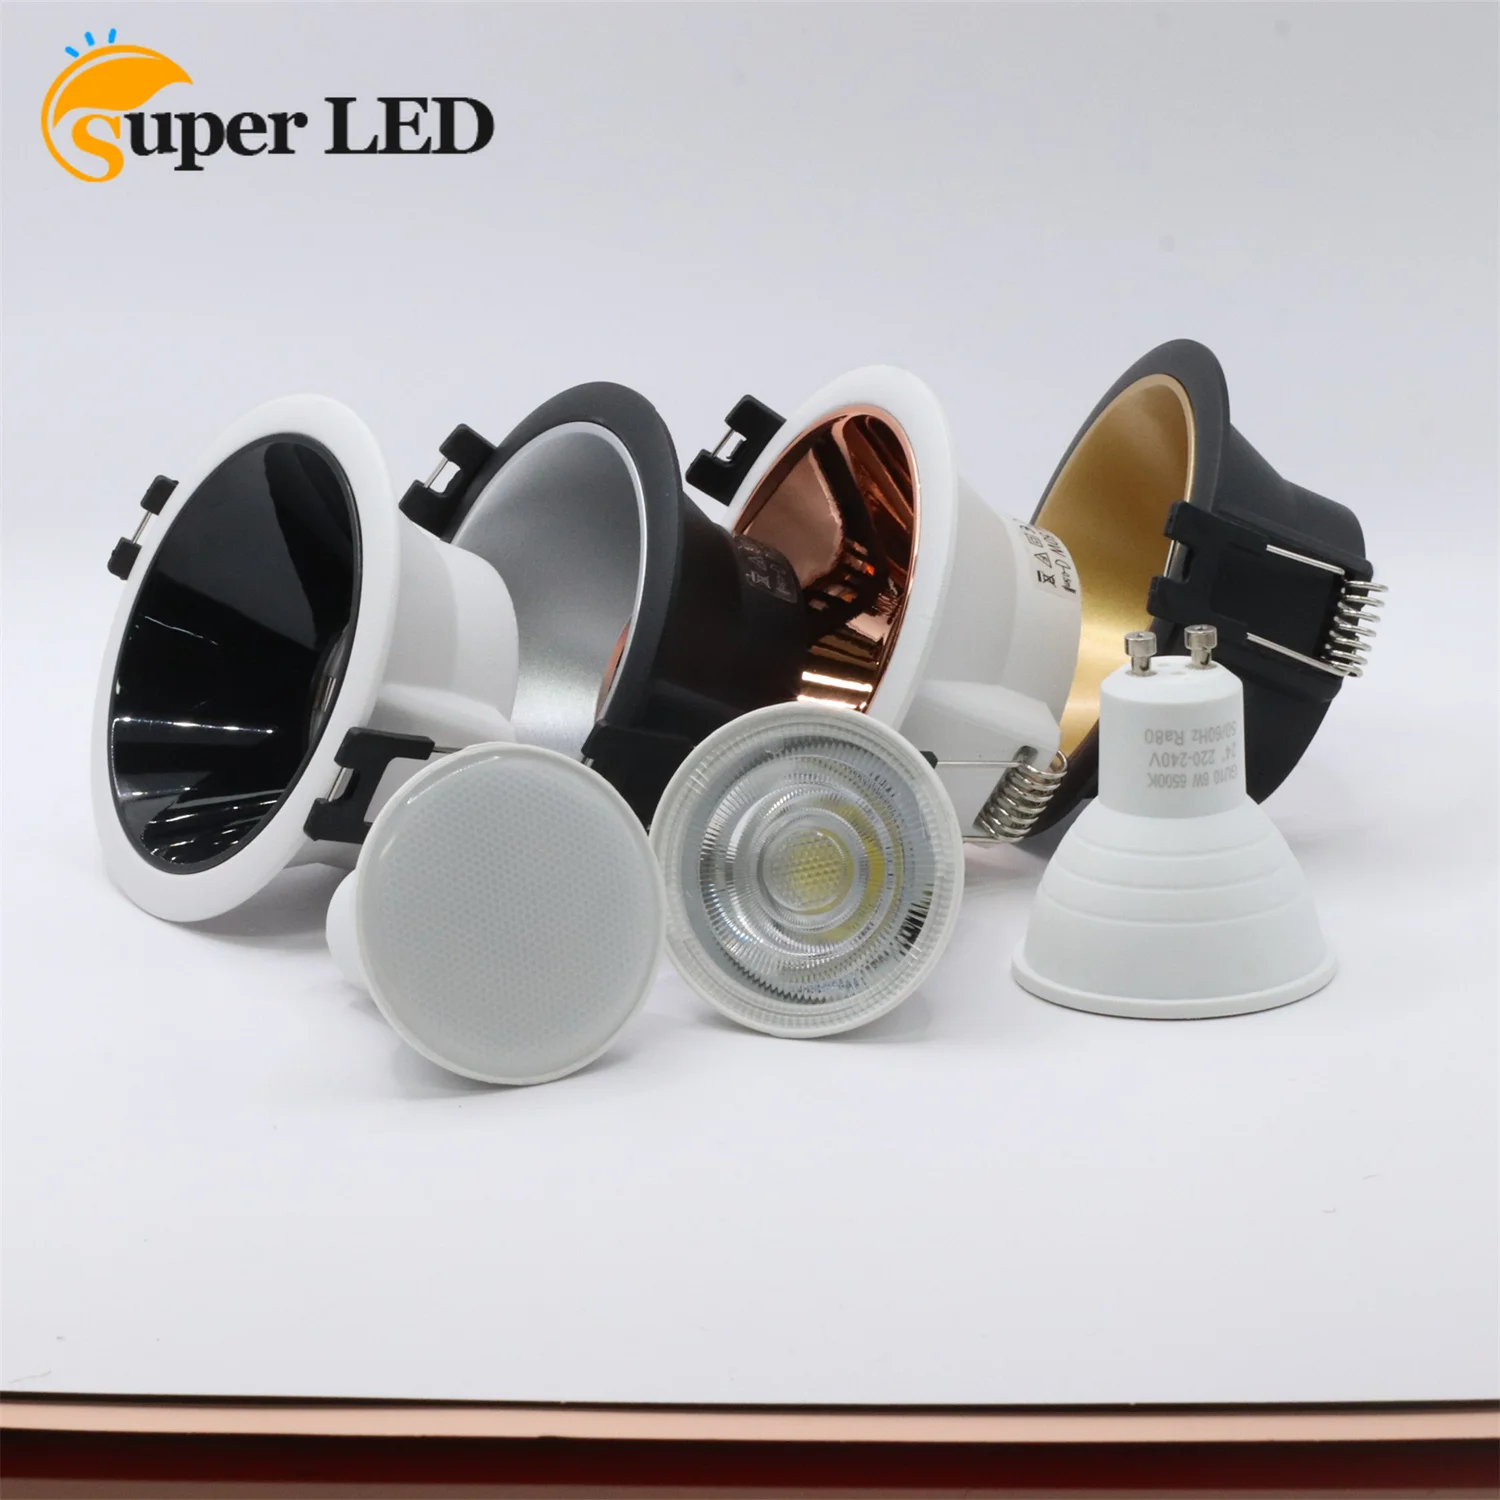 

Round Aluminum Alloy LED Ceiling Recessed Ceiling Spotlights GU10 Cut Hole 75mm Downlights Fitting